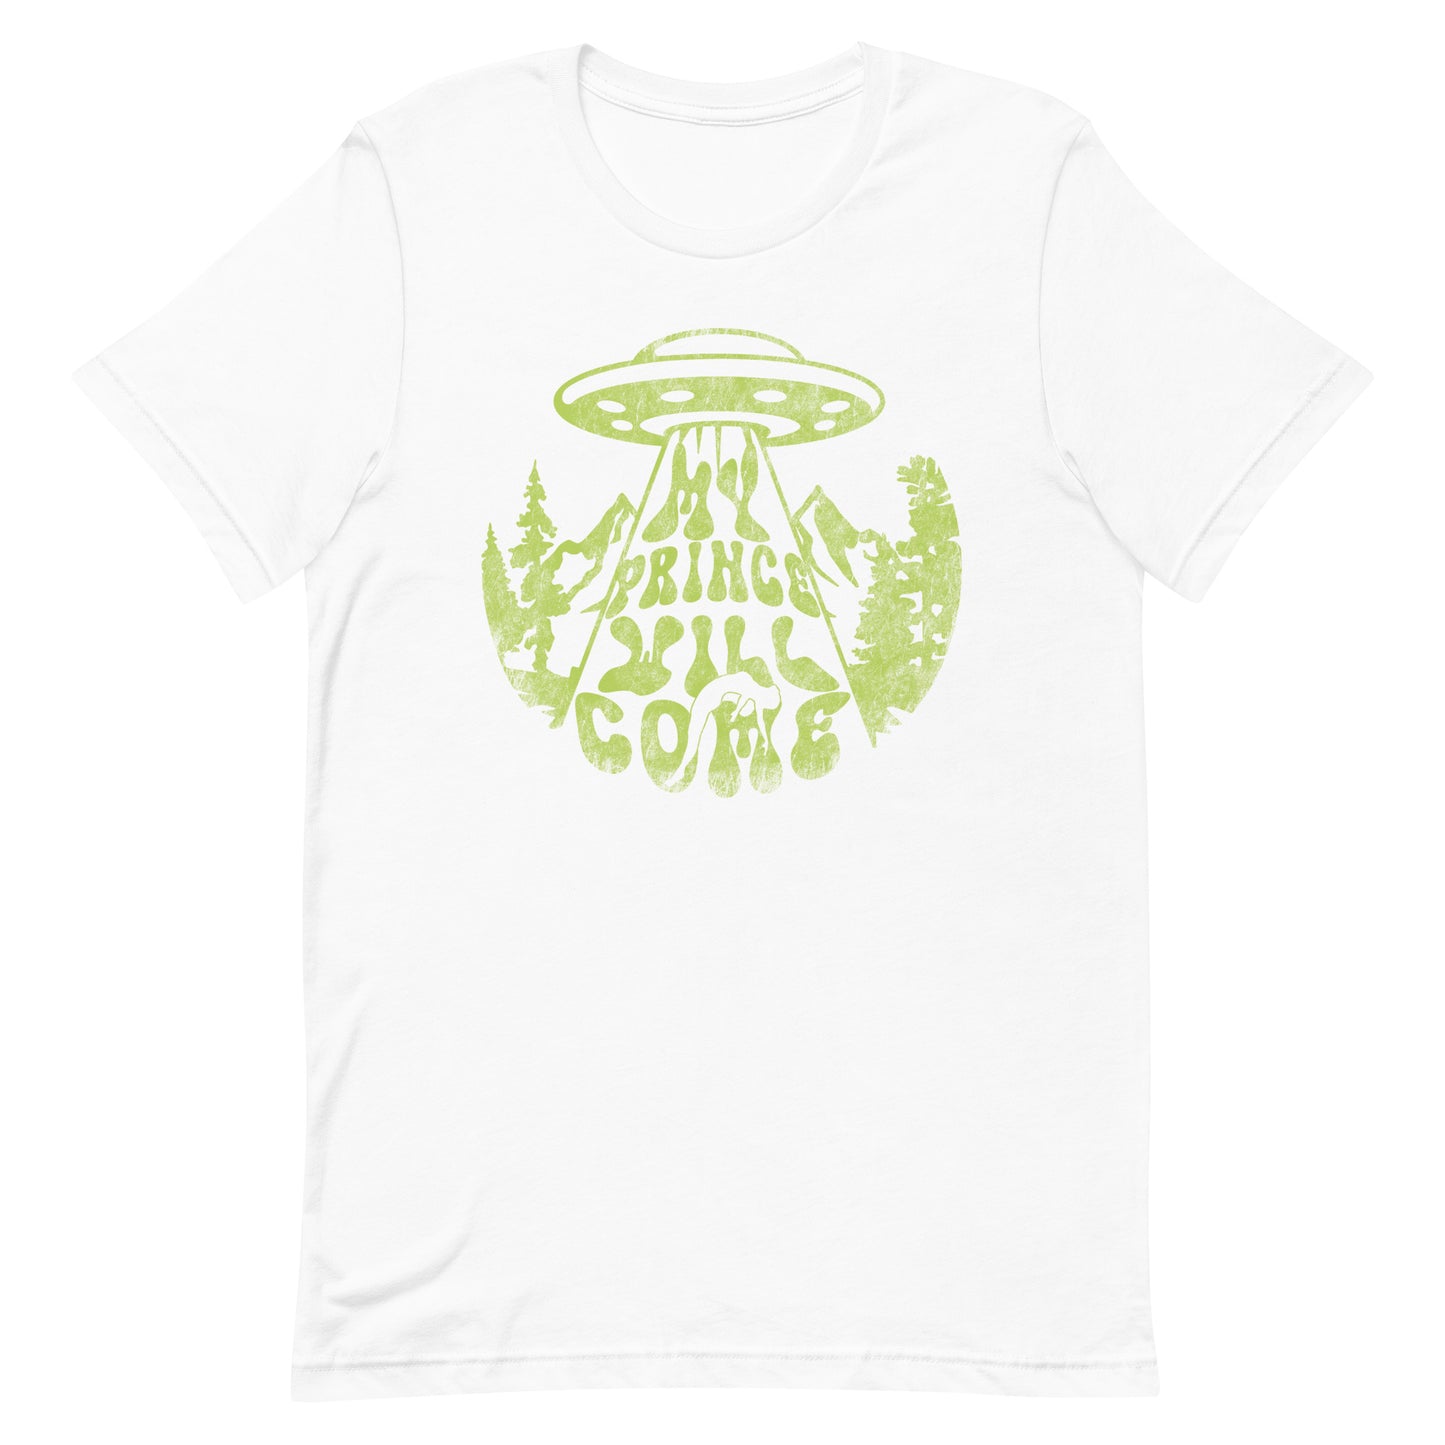 My prince will come alien sci-fi romance book tee for a smutty reader